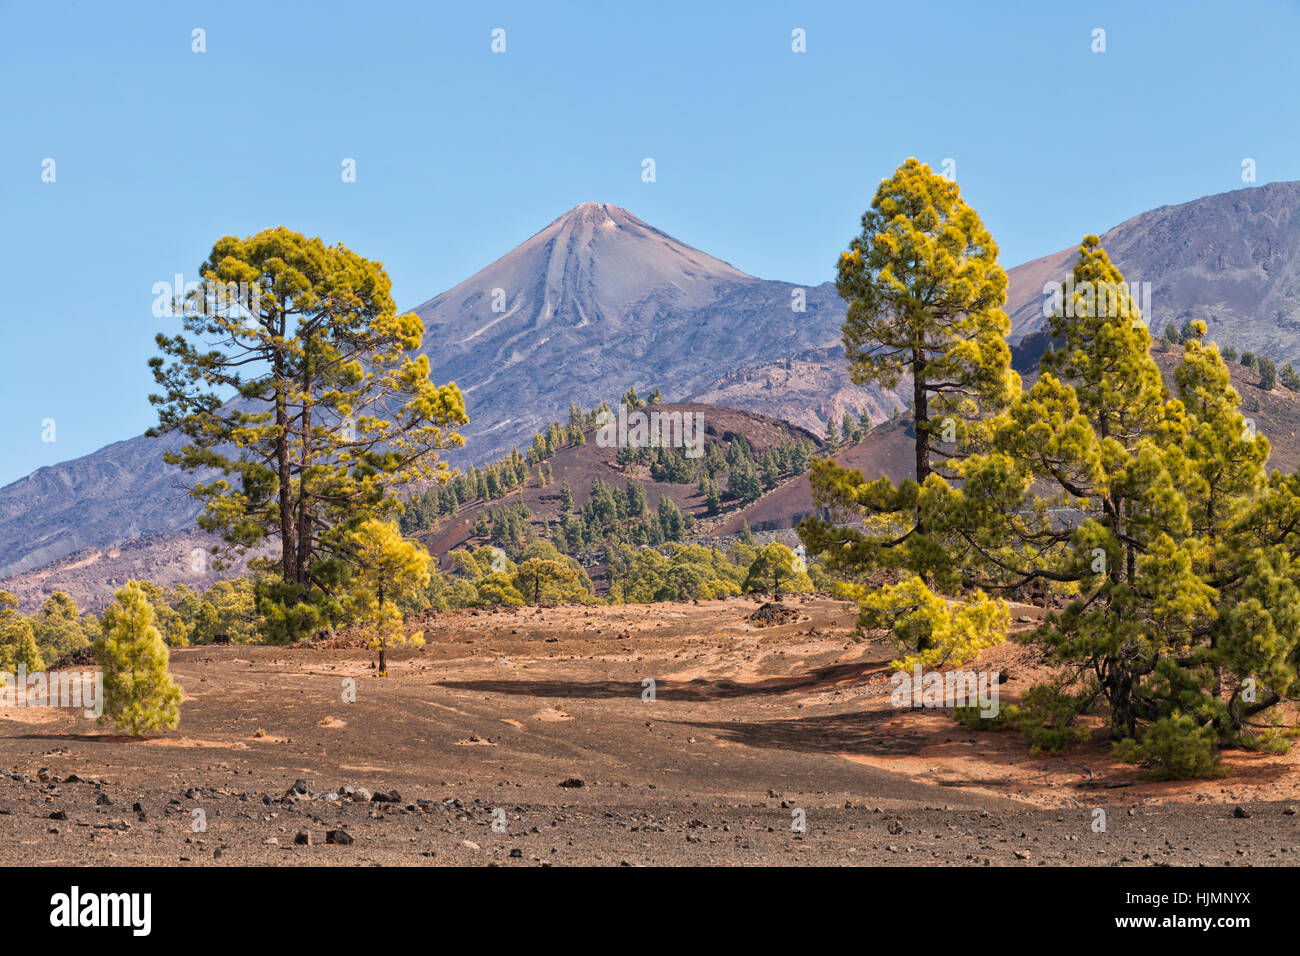 Tenerife volcano El Teide national park with pine tree forest on lower slopes Stock Photo